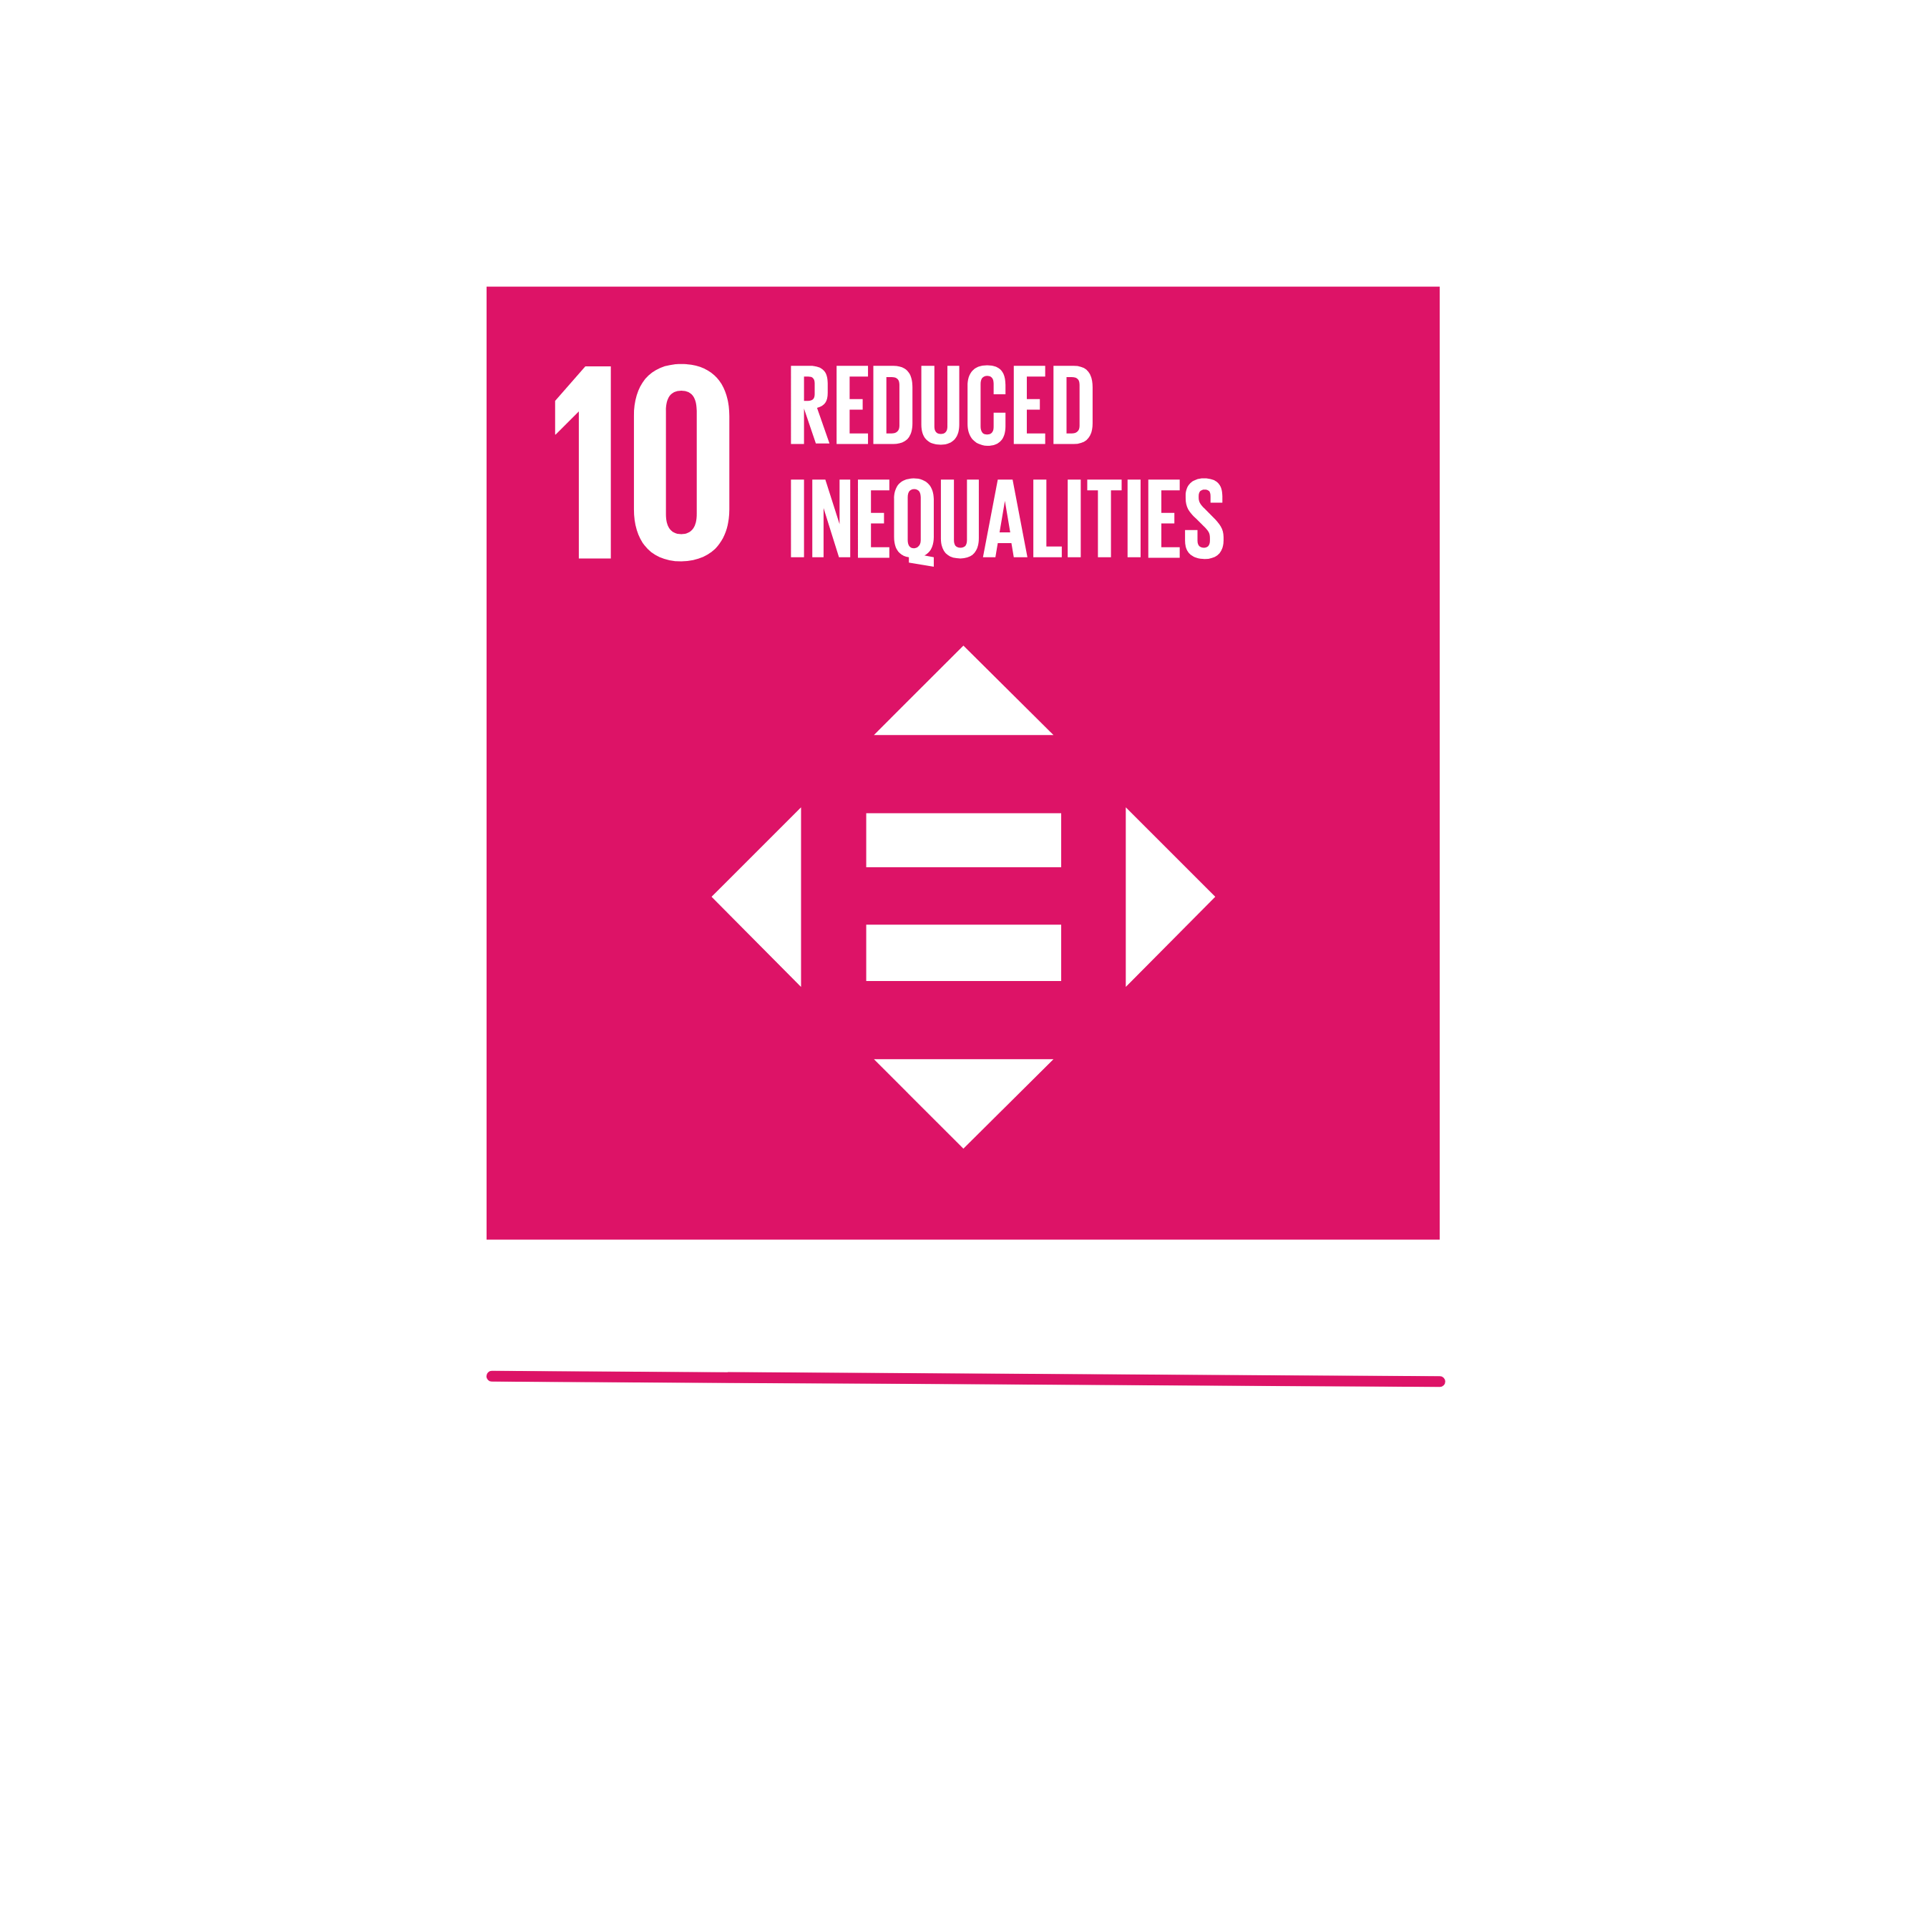 This is a picture of SDG 10, which stands for fewer inequalities. SUMM is working for less inequalities within the framework of SDG 10.